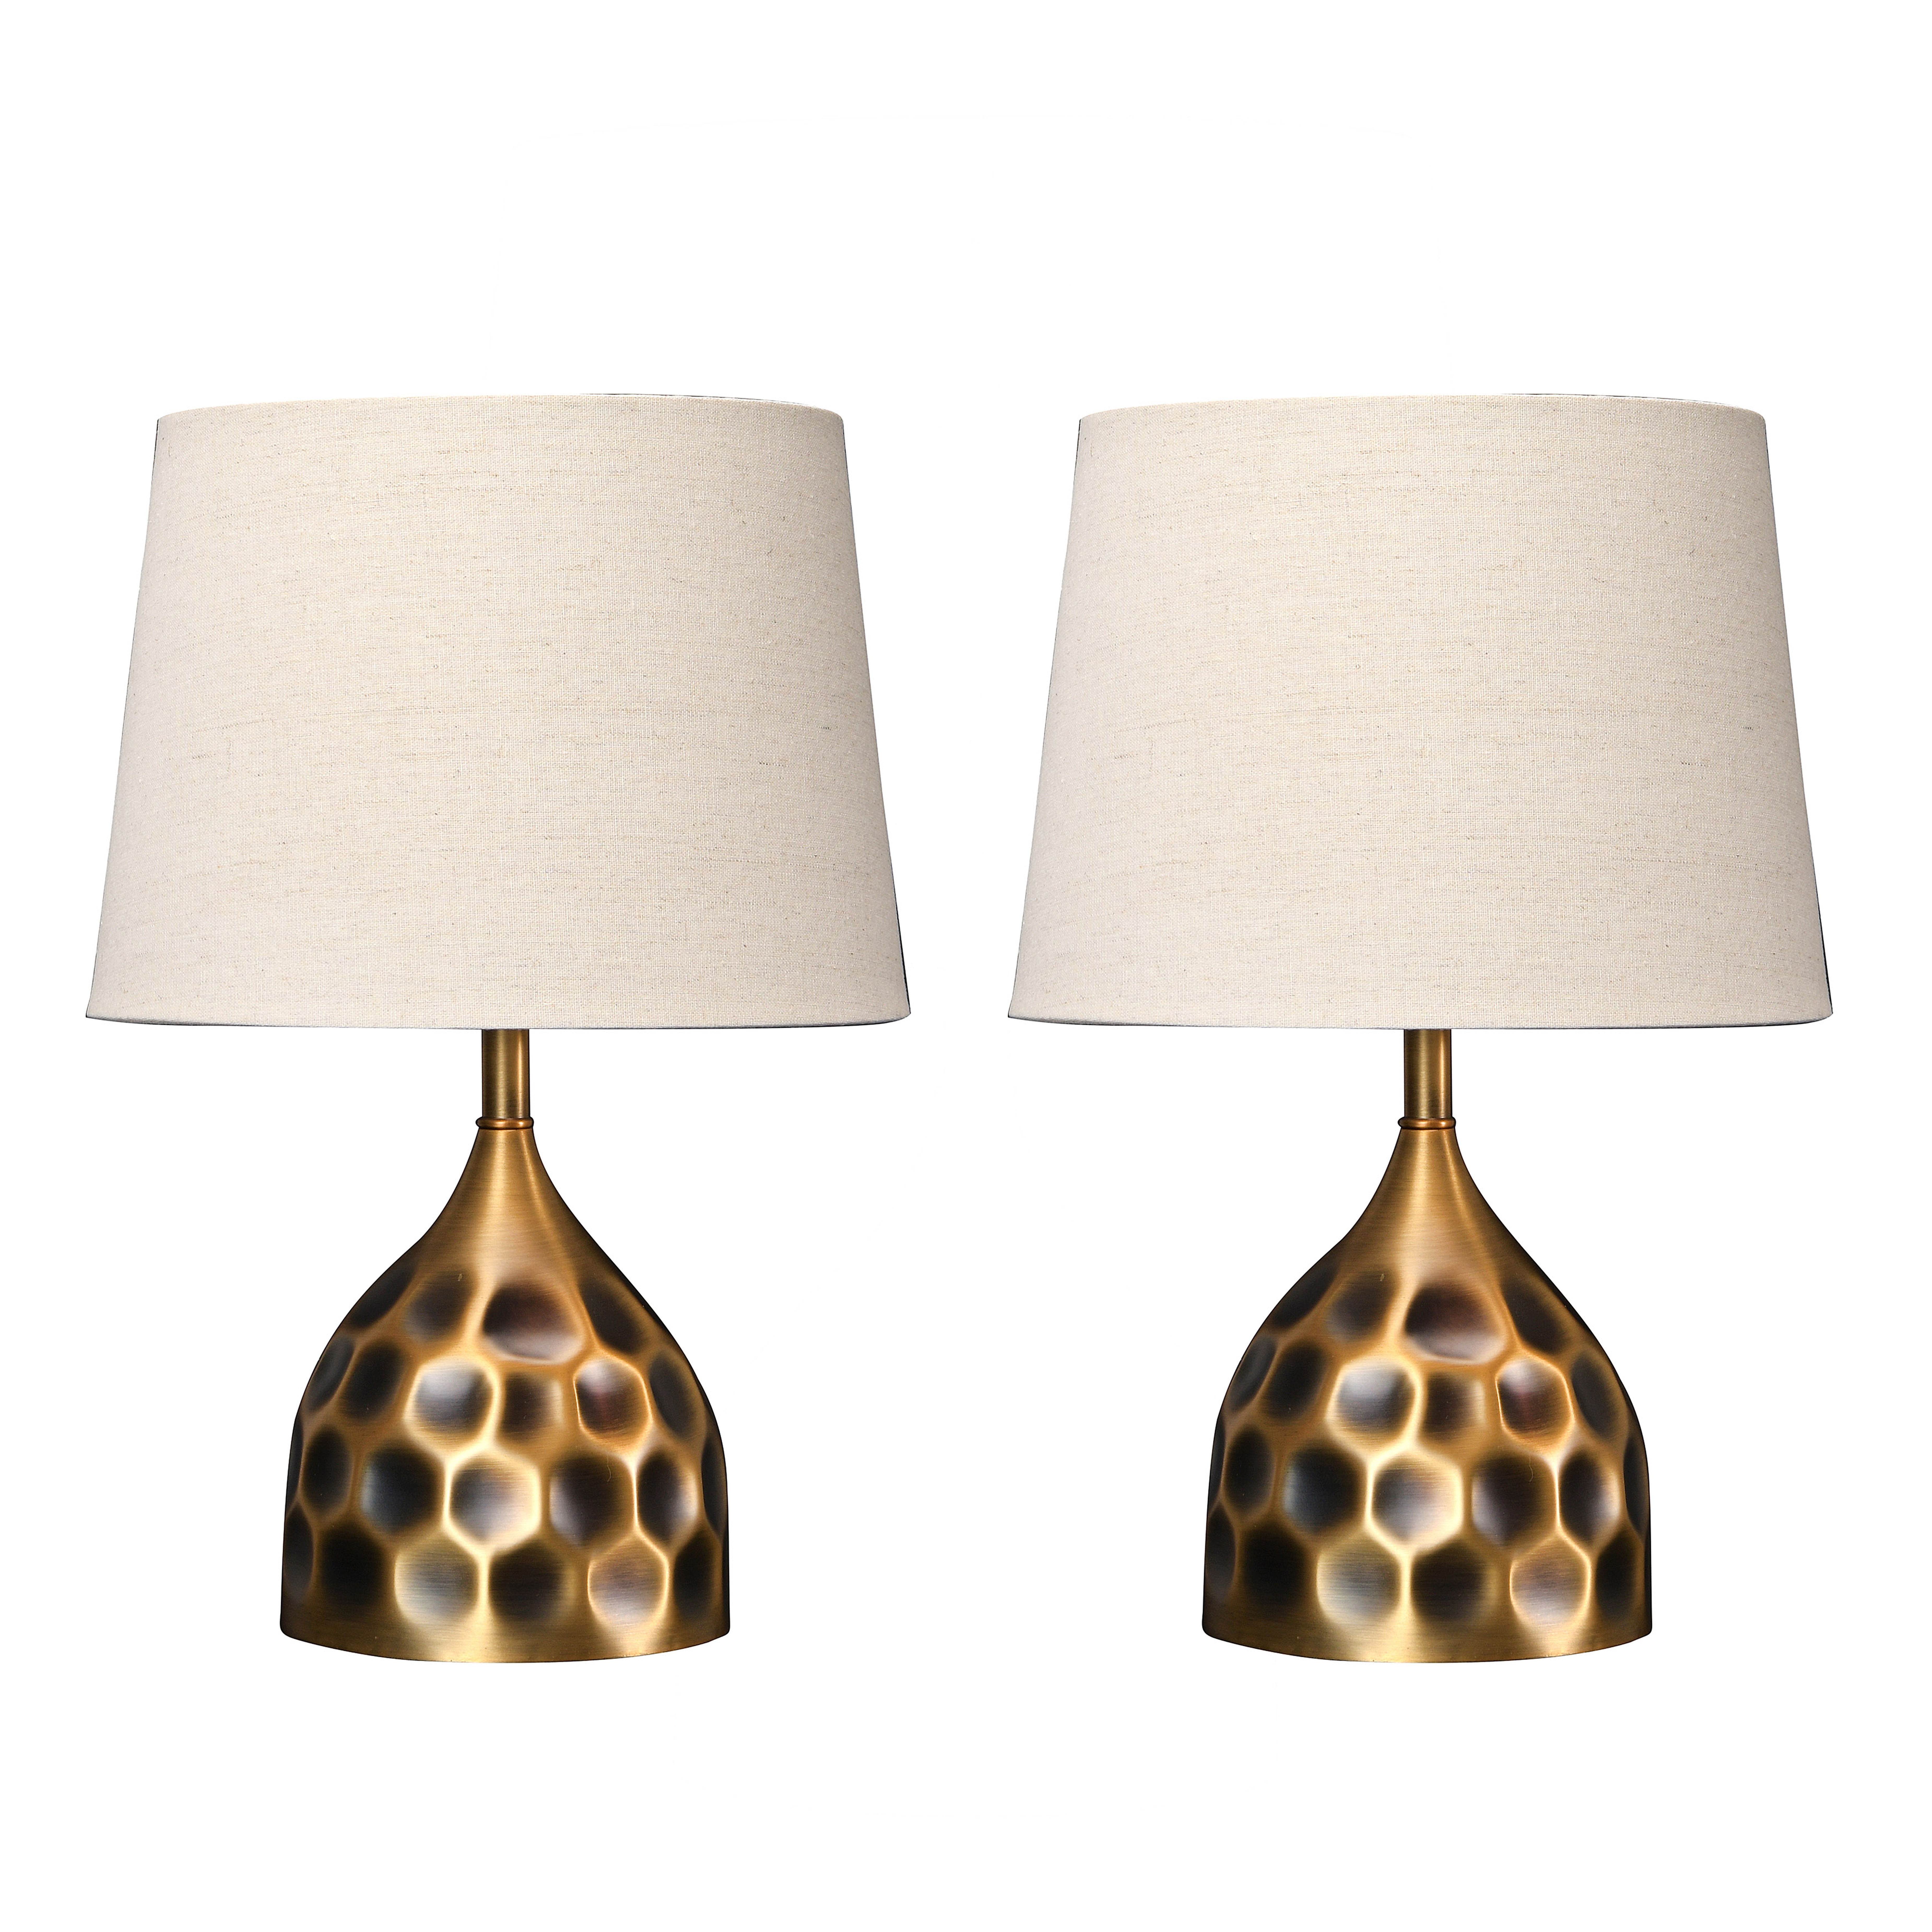 19" Hammered Brass Table Lamps, Set of 2 - Nomad Home